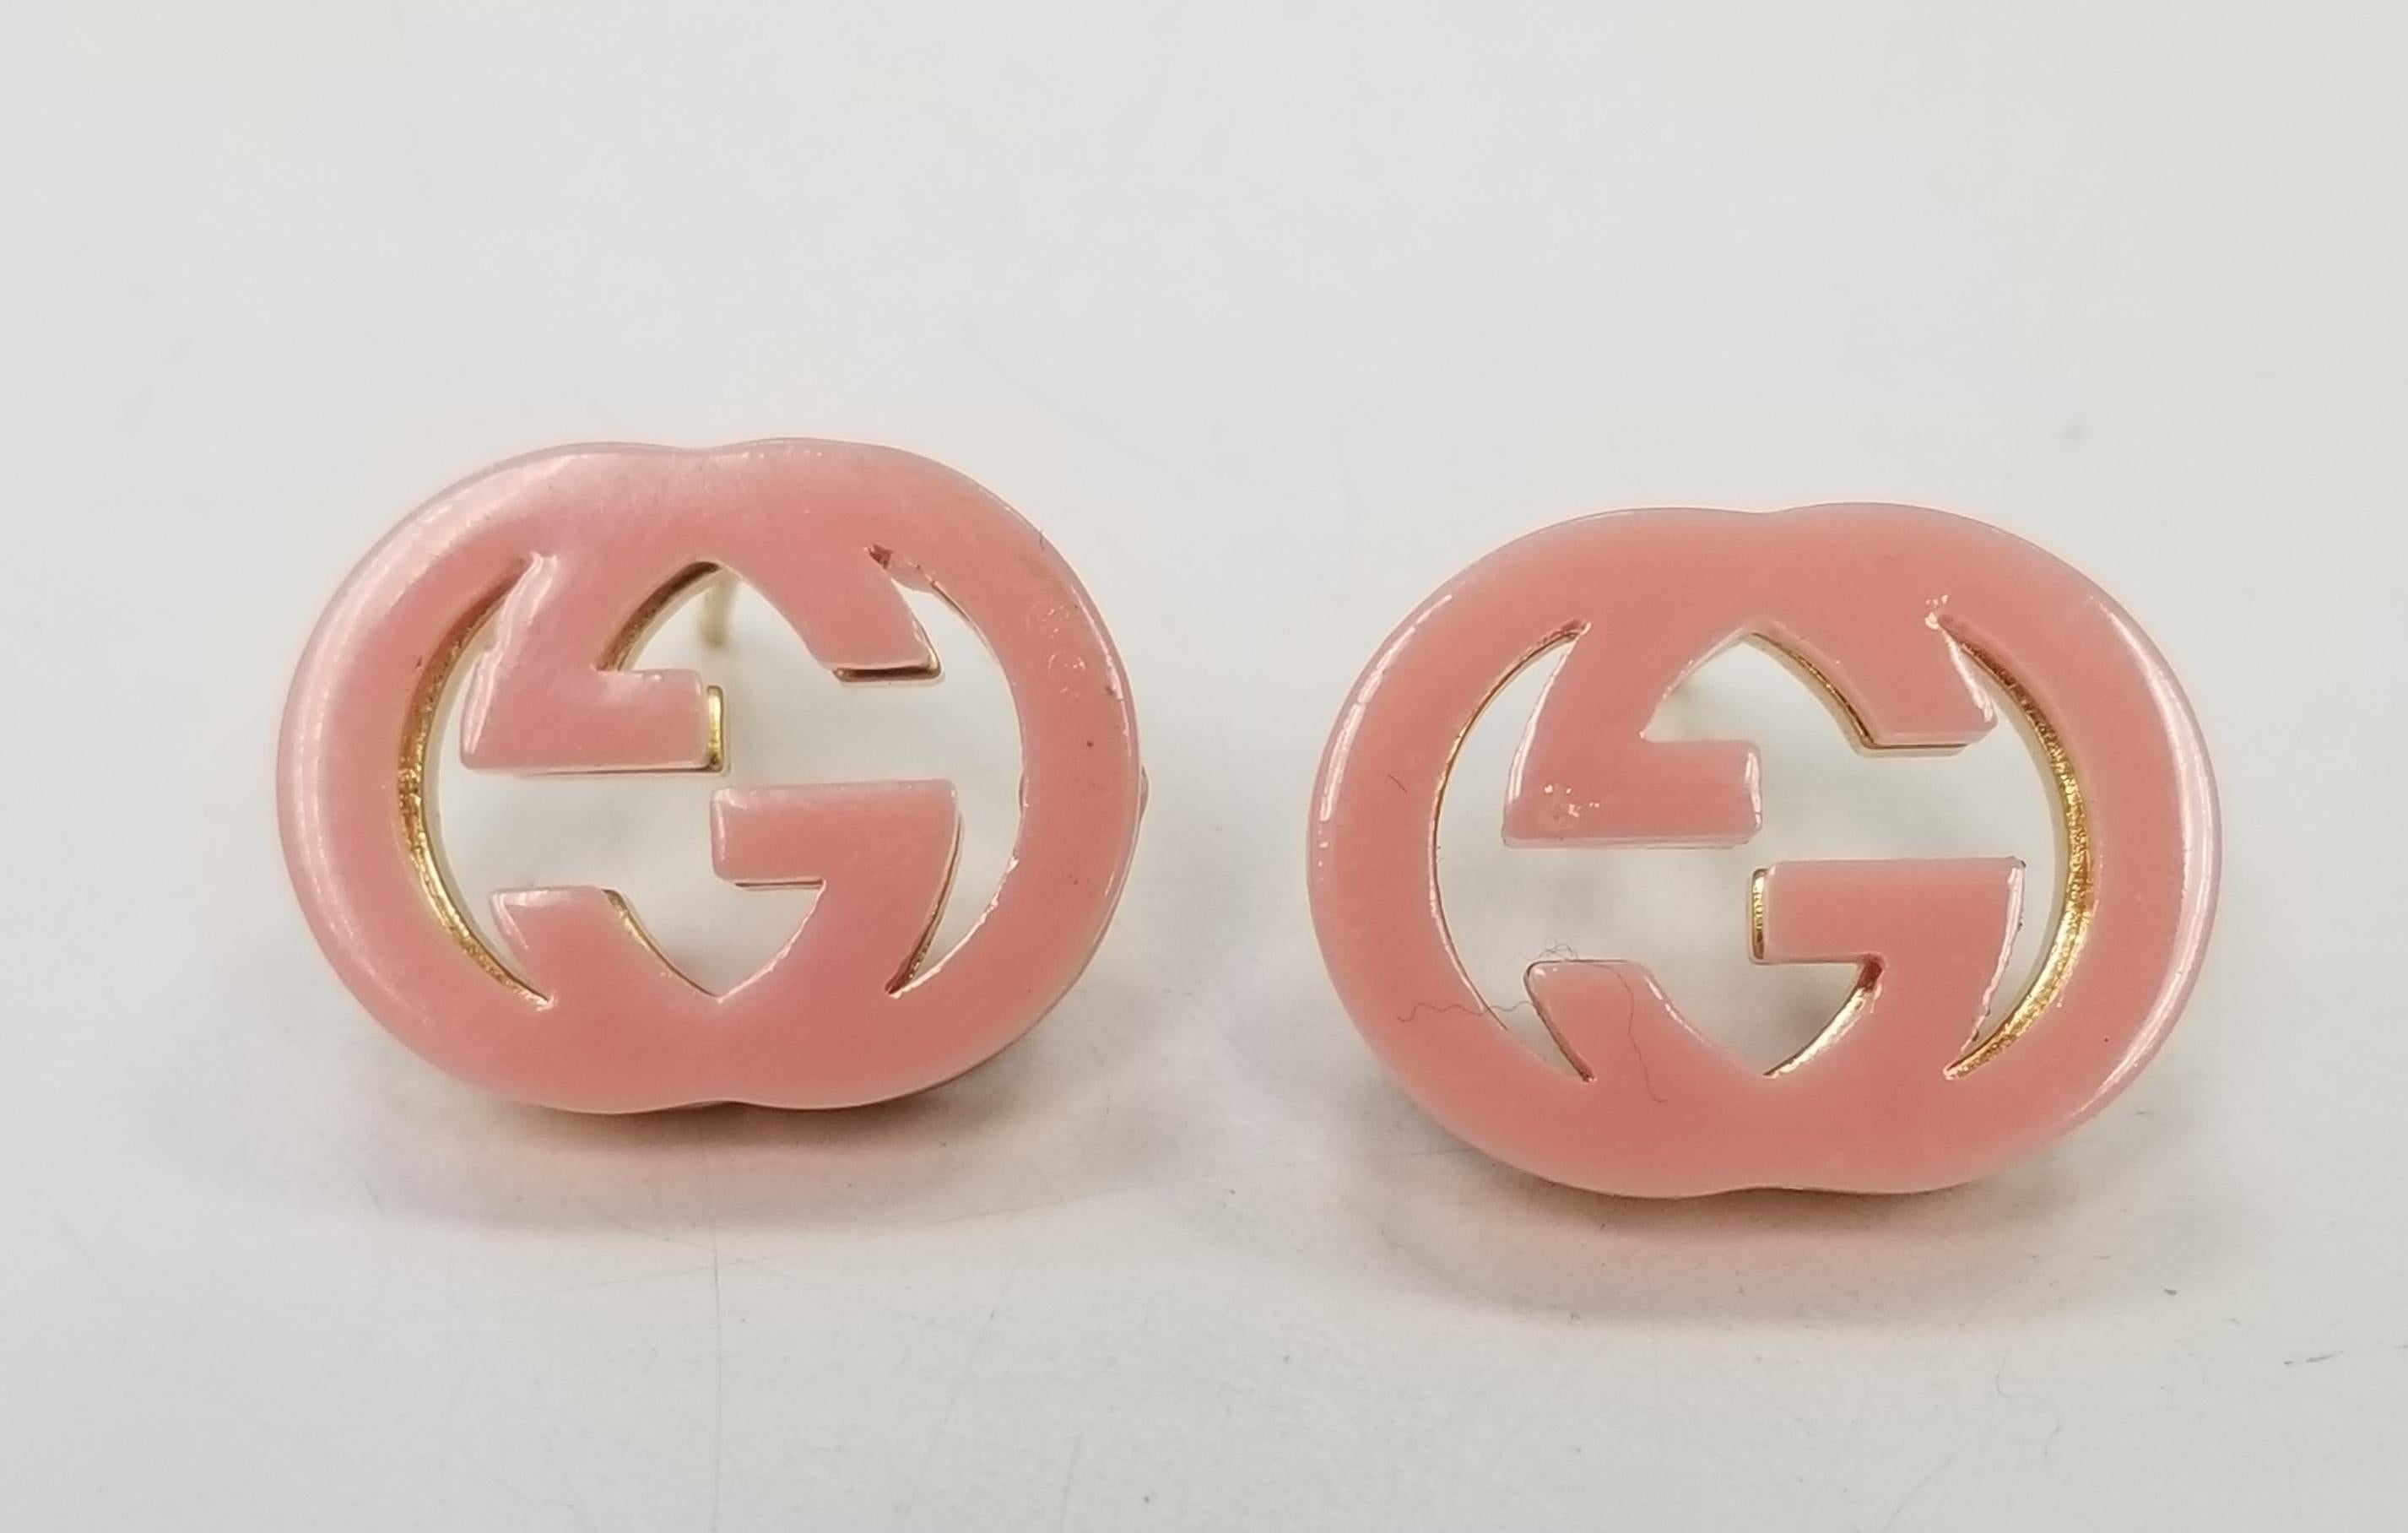  Specification
    Category Earrings
    Brand GUCCI with Pink Enamel
    Recipient For Her, For Him
    Earring Style Stud Earrings
    Brand Collections GG Marmont
    Metal Type Gold Plated
